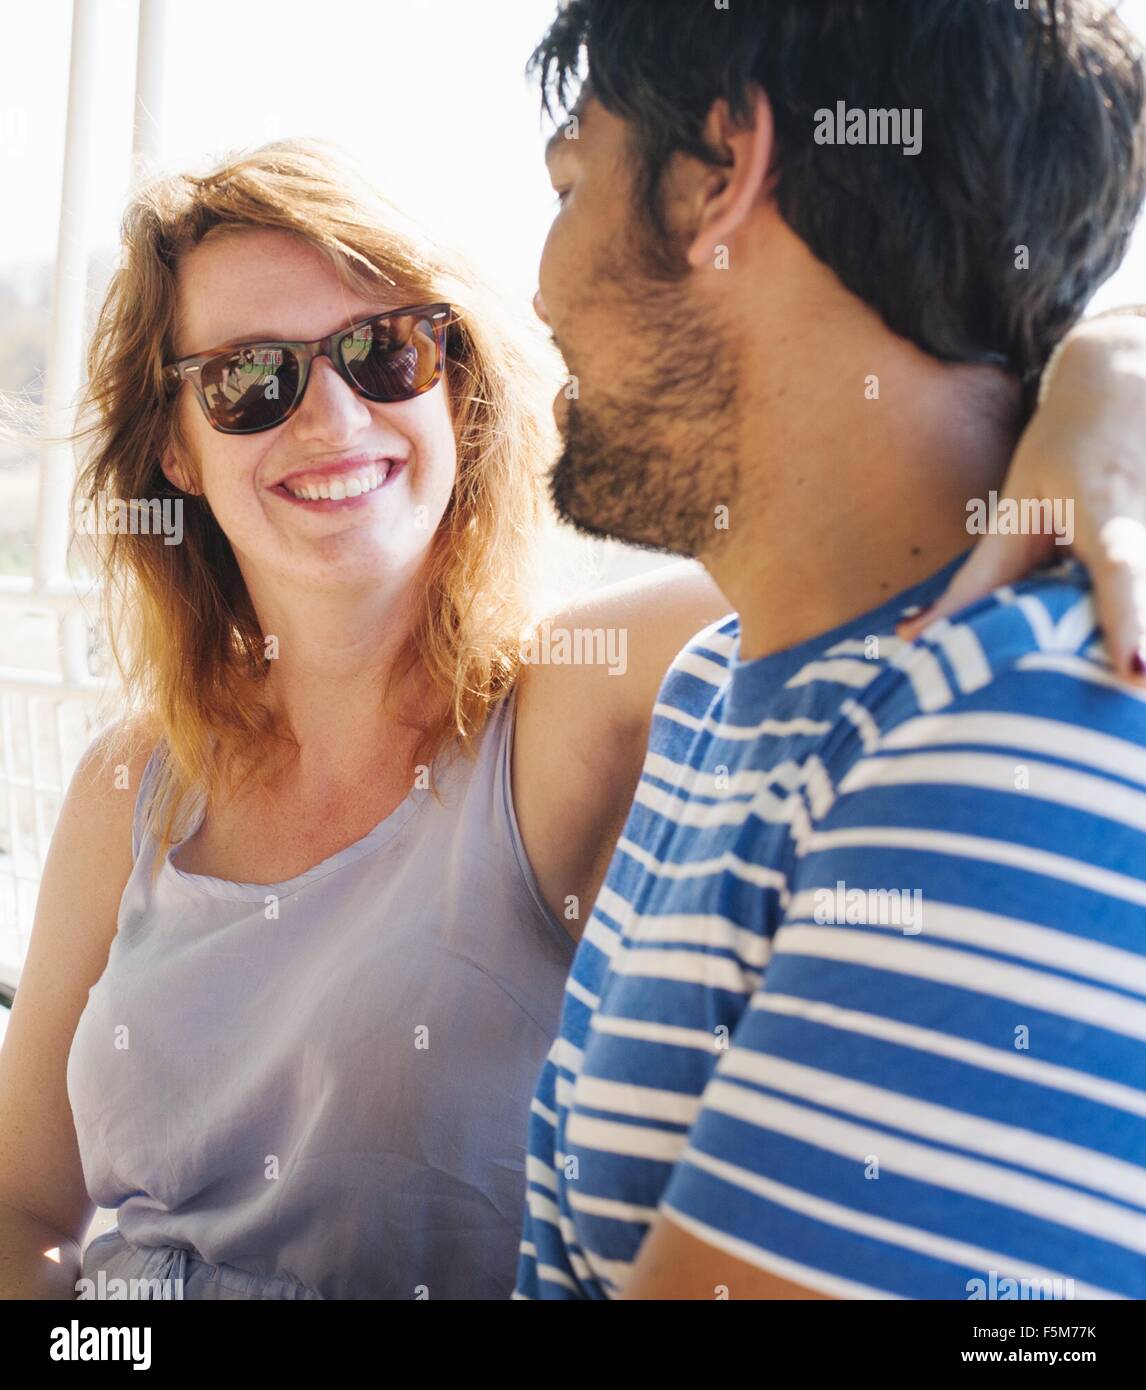 Portrait of young woman with arm around boyfriend Stock Photo